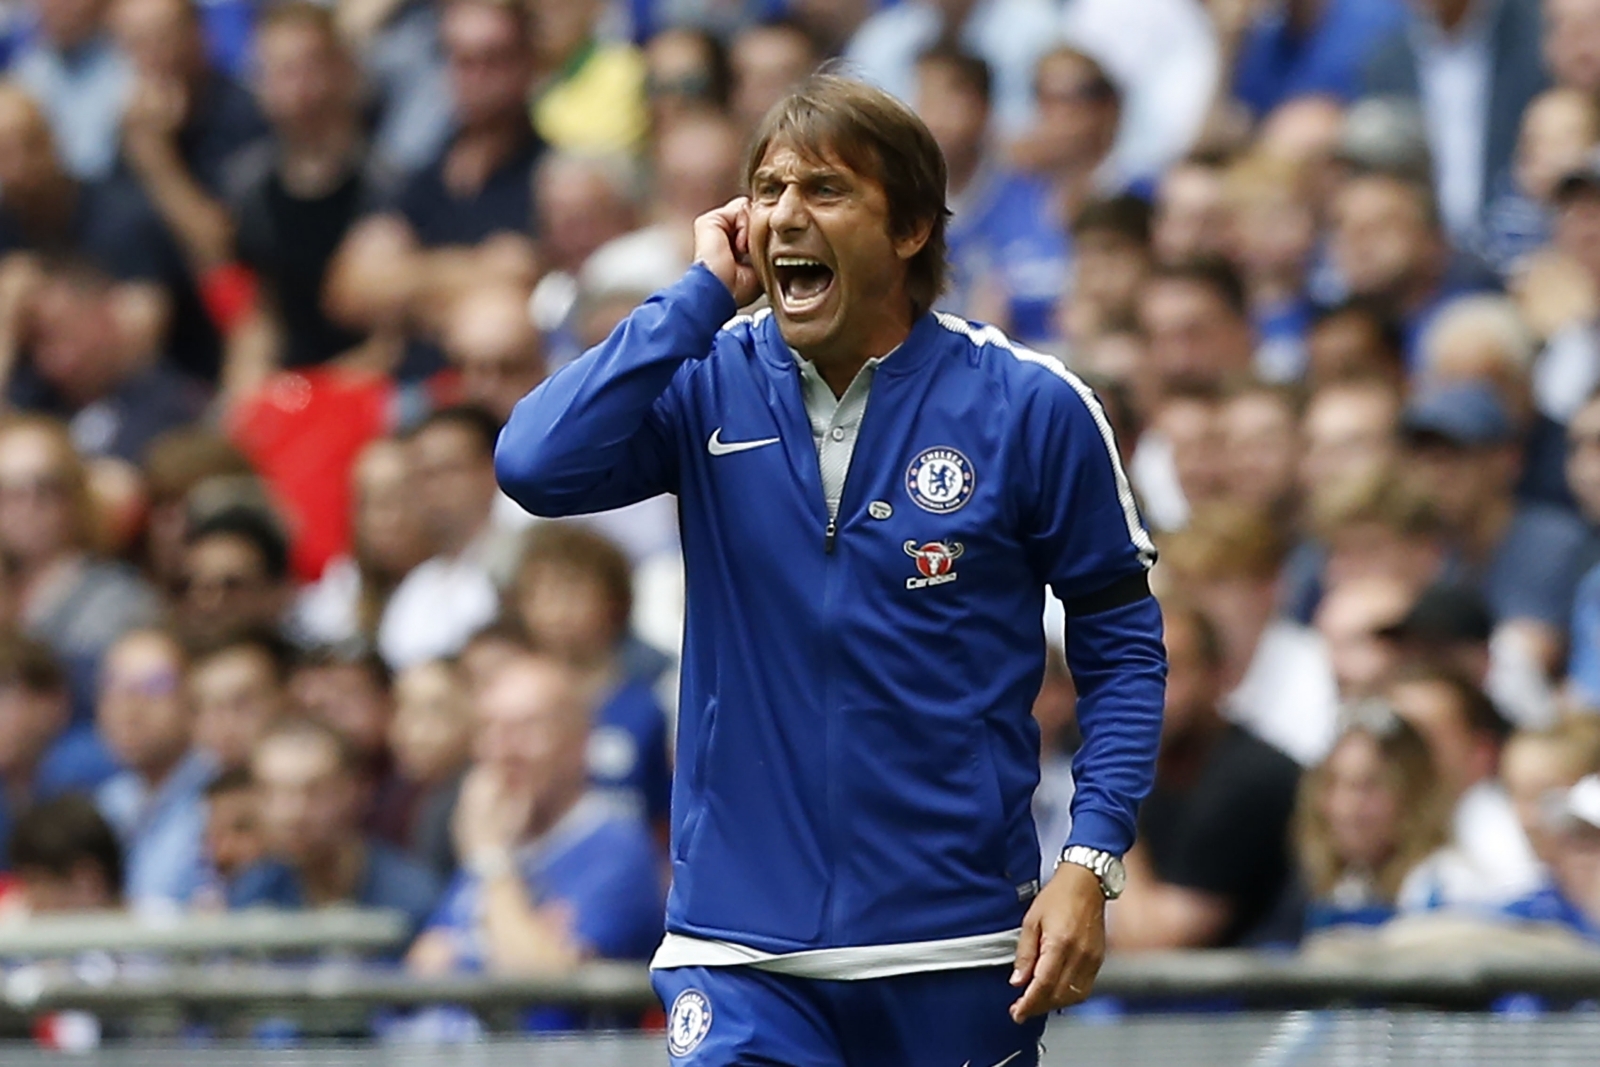 Antonio Conte will probably have left Chelsea within 12 months - Jamie Carragher